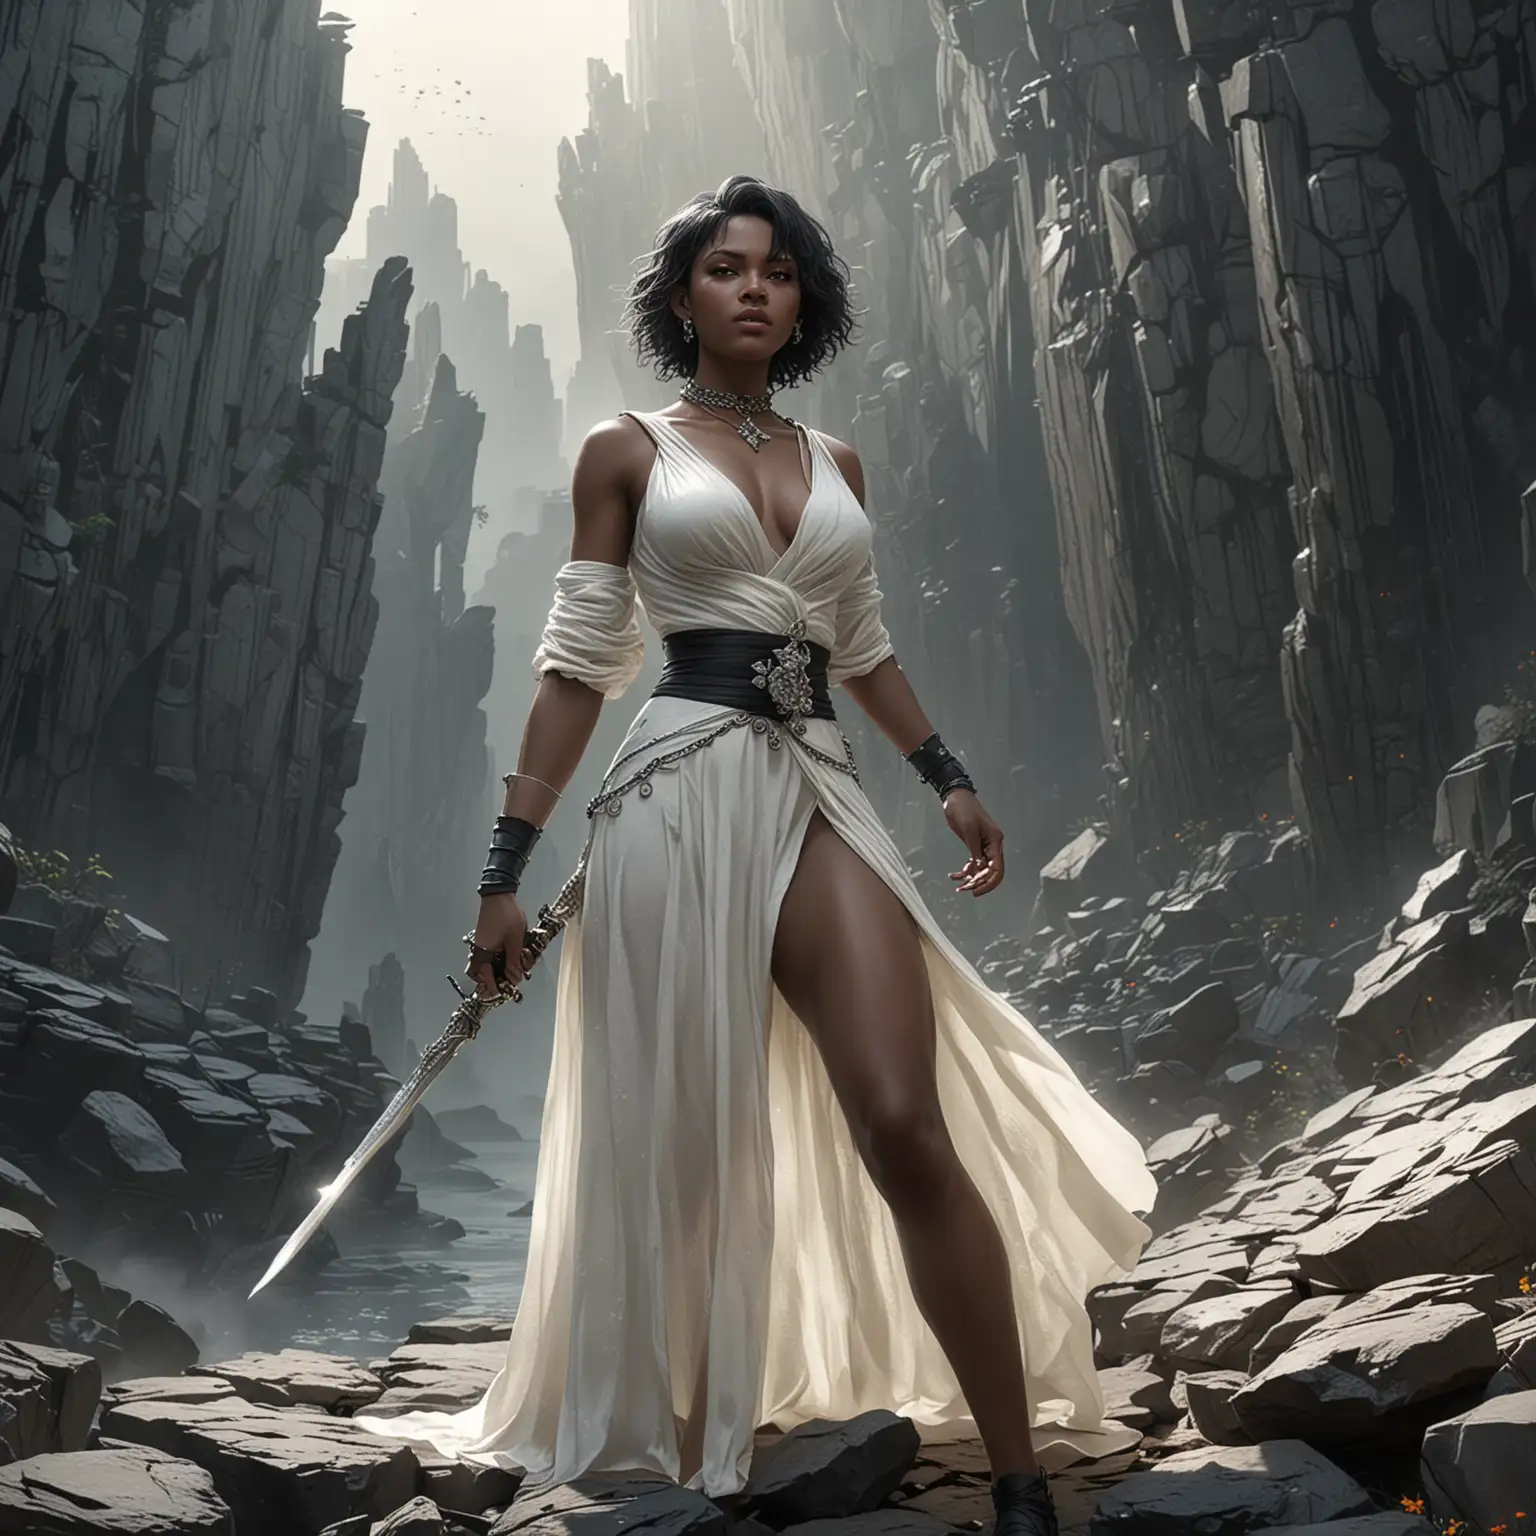 The woman in the image is wearing a white dress and is standing on a rocky surface. She appears to be a character from the video game Nier Replicant. She is holding a sword in her hand, and there is another woman sitting on the rock behind her. The scene seems to be set in a fantasy or futuristic environment, with the woman in the white dress being the main focus of the image.Diamond Jewelry,  Necklace, Rings and earrings.Black woman painterly smooth, extremely sharp detail, finely tuned, 8 k, ultra sharp focus, illustration, illustration, art by Ayami Kojima Beautiful Thick Sexy Black women The woman's body parts such as chest, thigh, stomach, and abdomen are visible